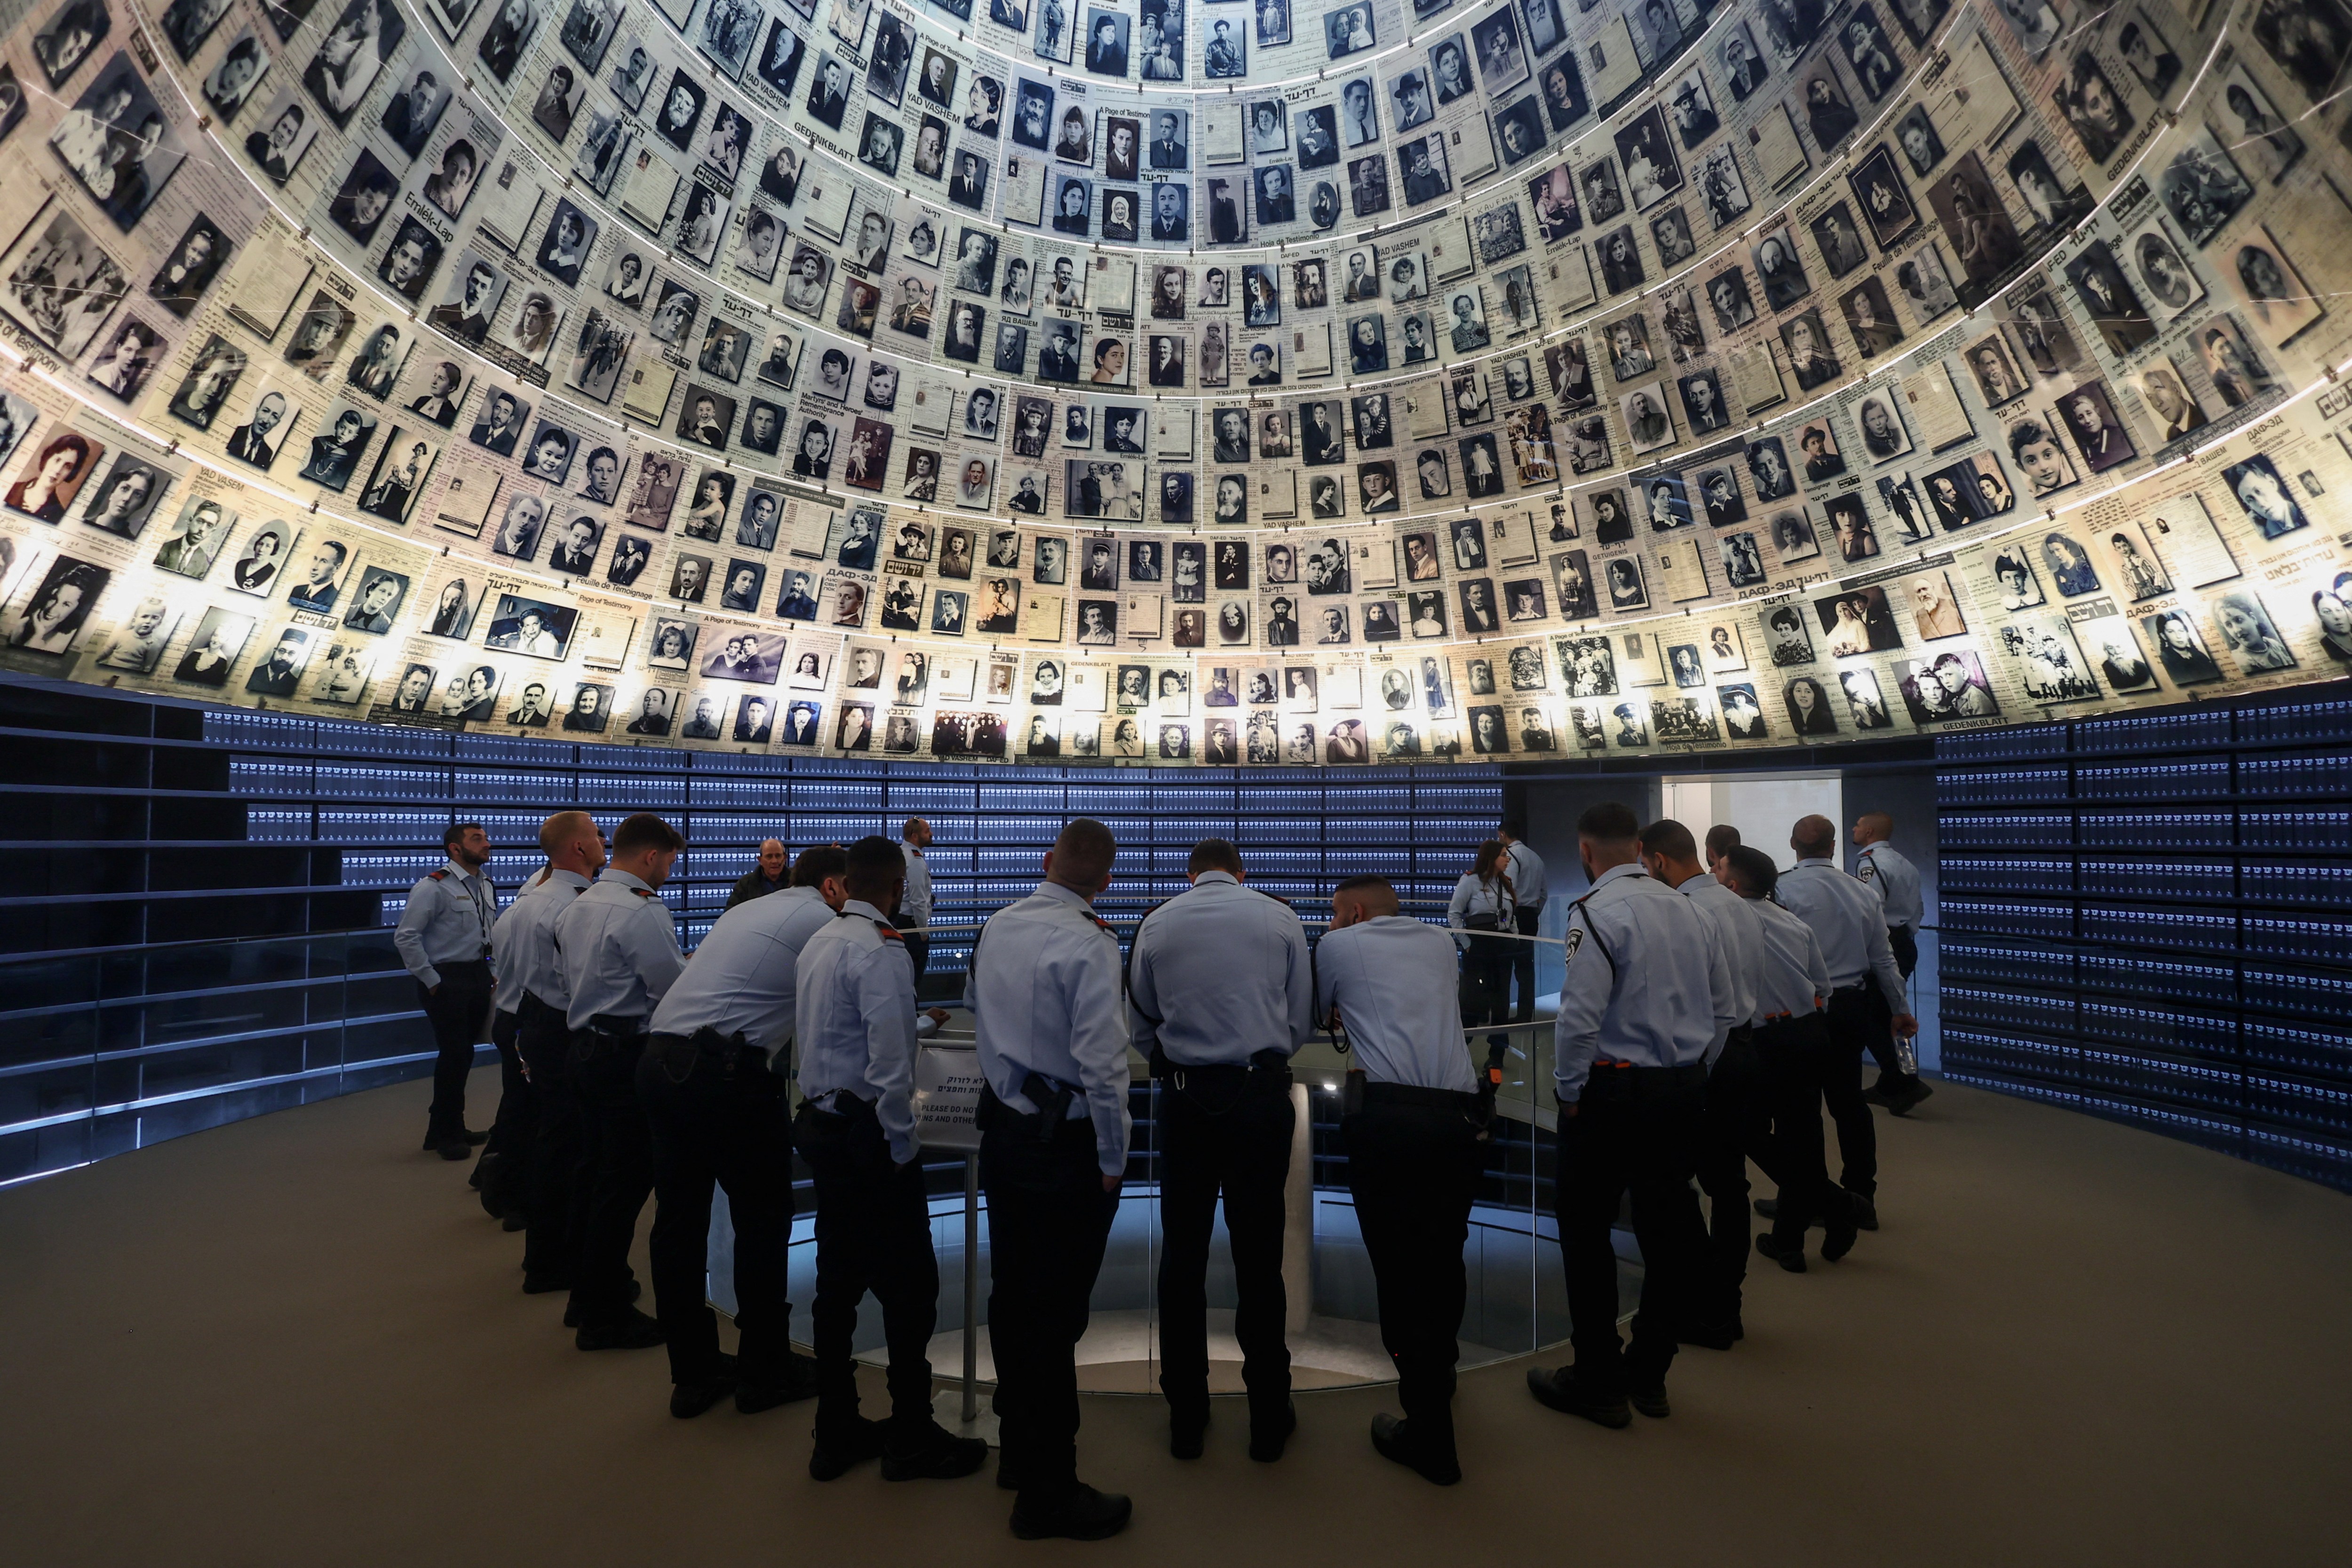 The Israeli prime minister was speaking at Yad Vashem, the world Holocaust remembrance centre